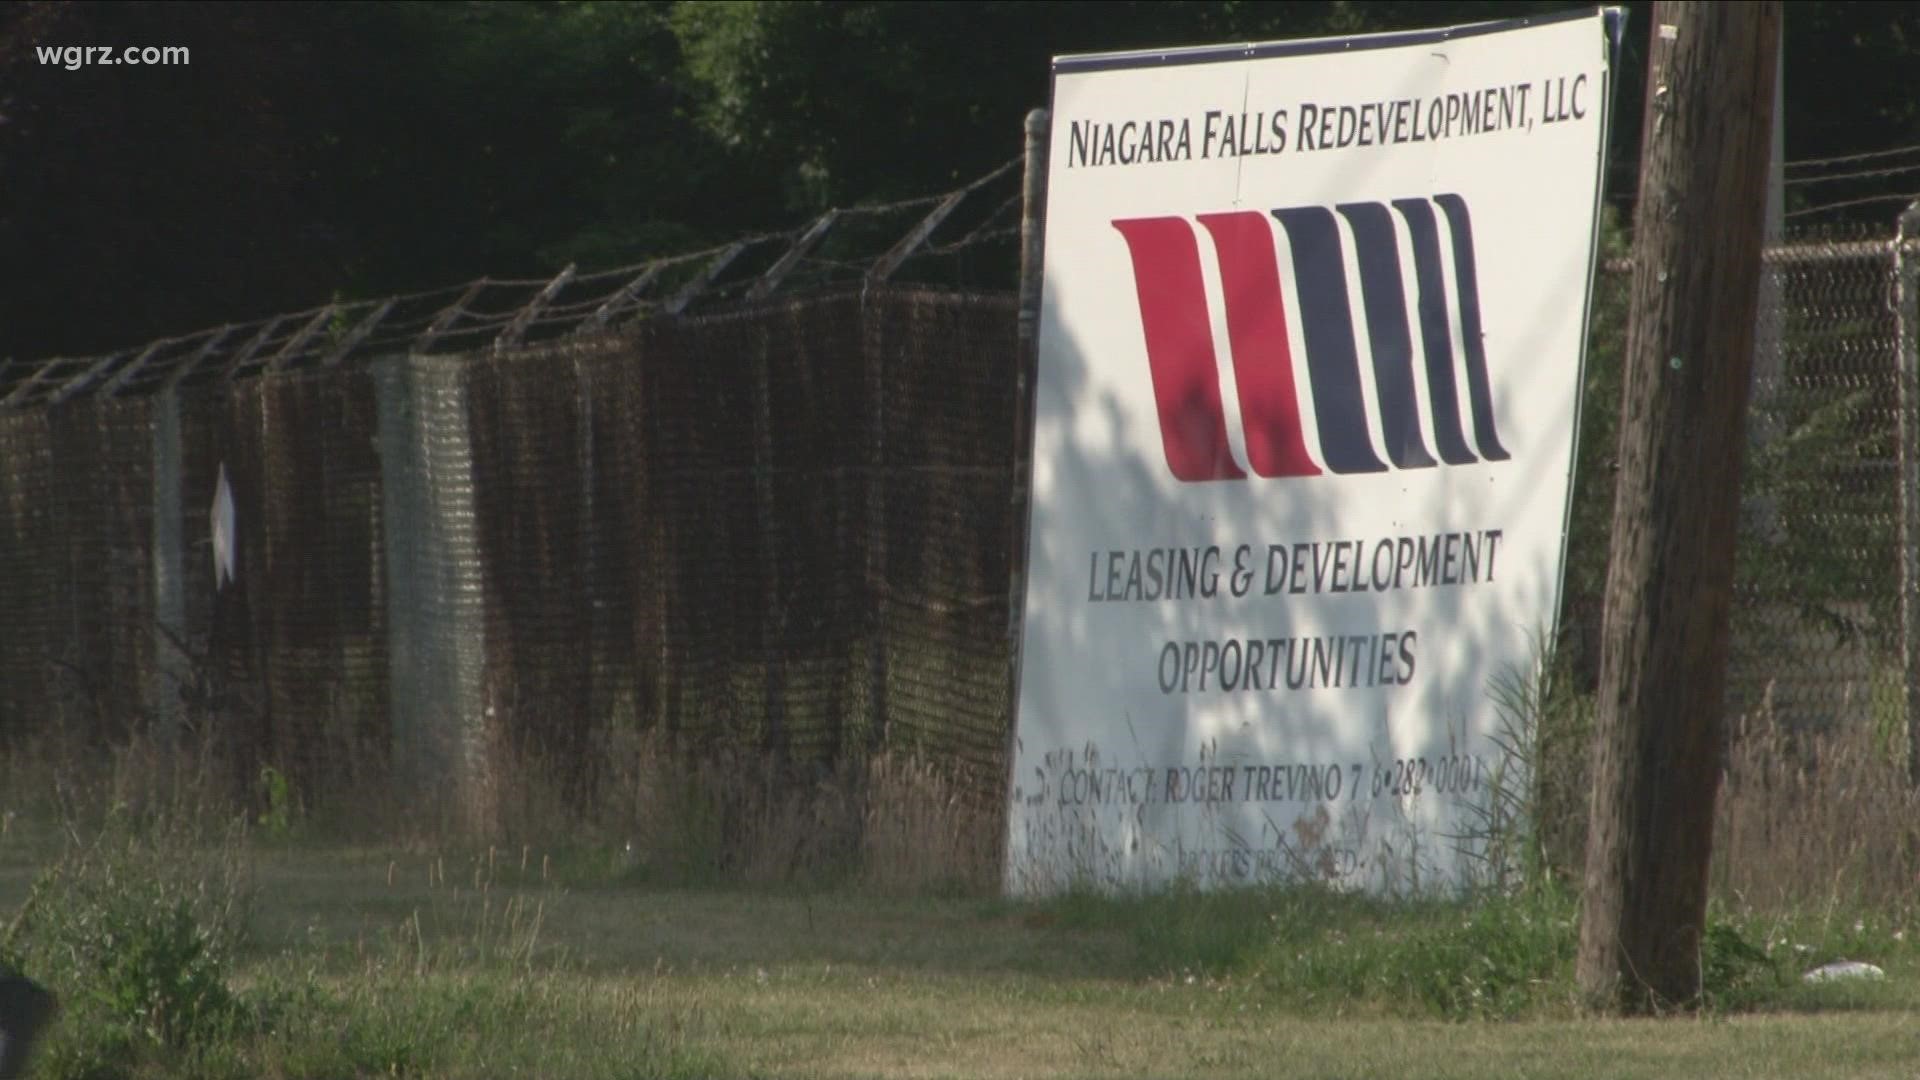 Plenty of people spoke in favor of both projects, and by the end of the night, the city and the land owner, Niagara Falls Redevelopment, had both been criticized.